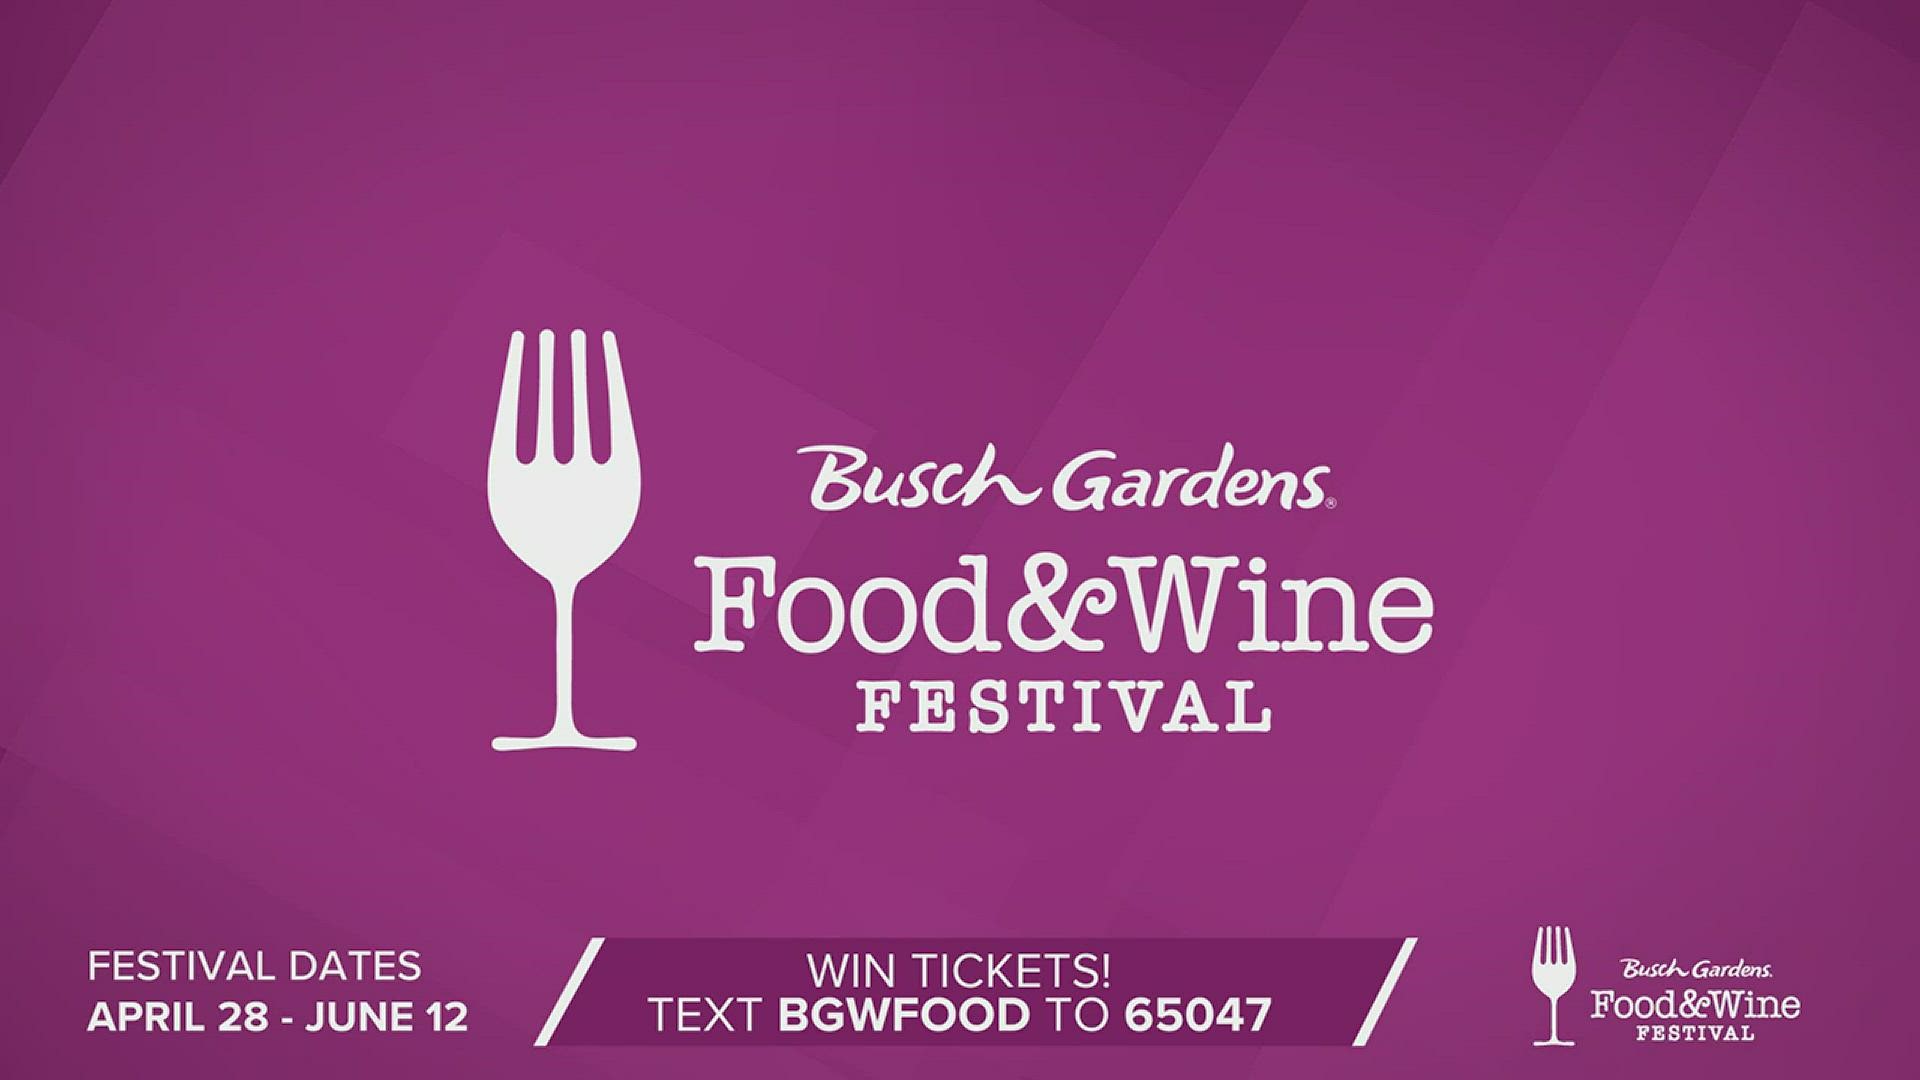 Text for a chance to win tickets to the Busch Gardens Food & Wine Festival!